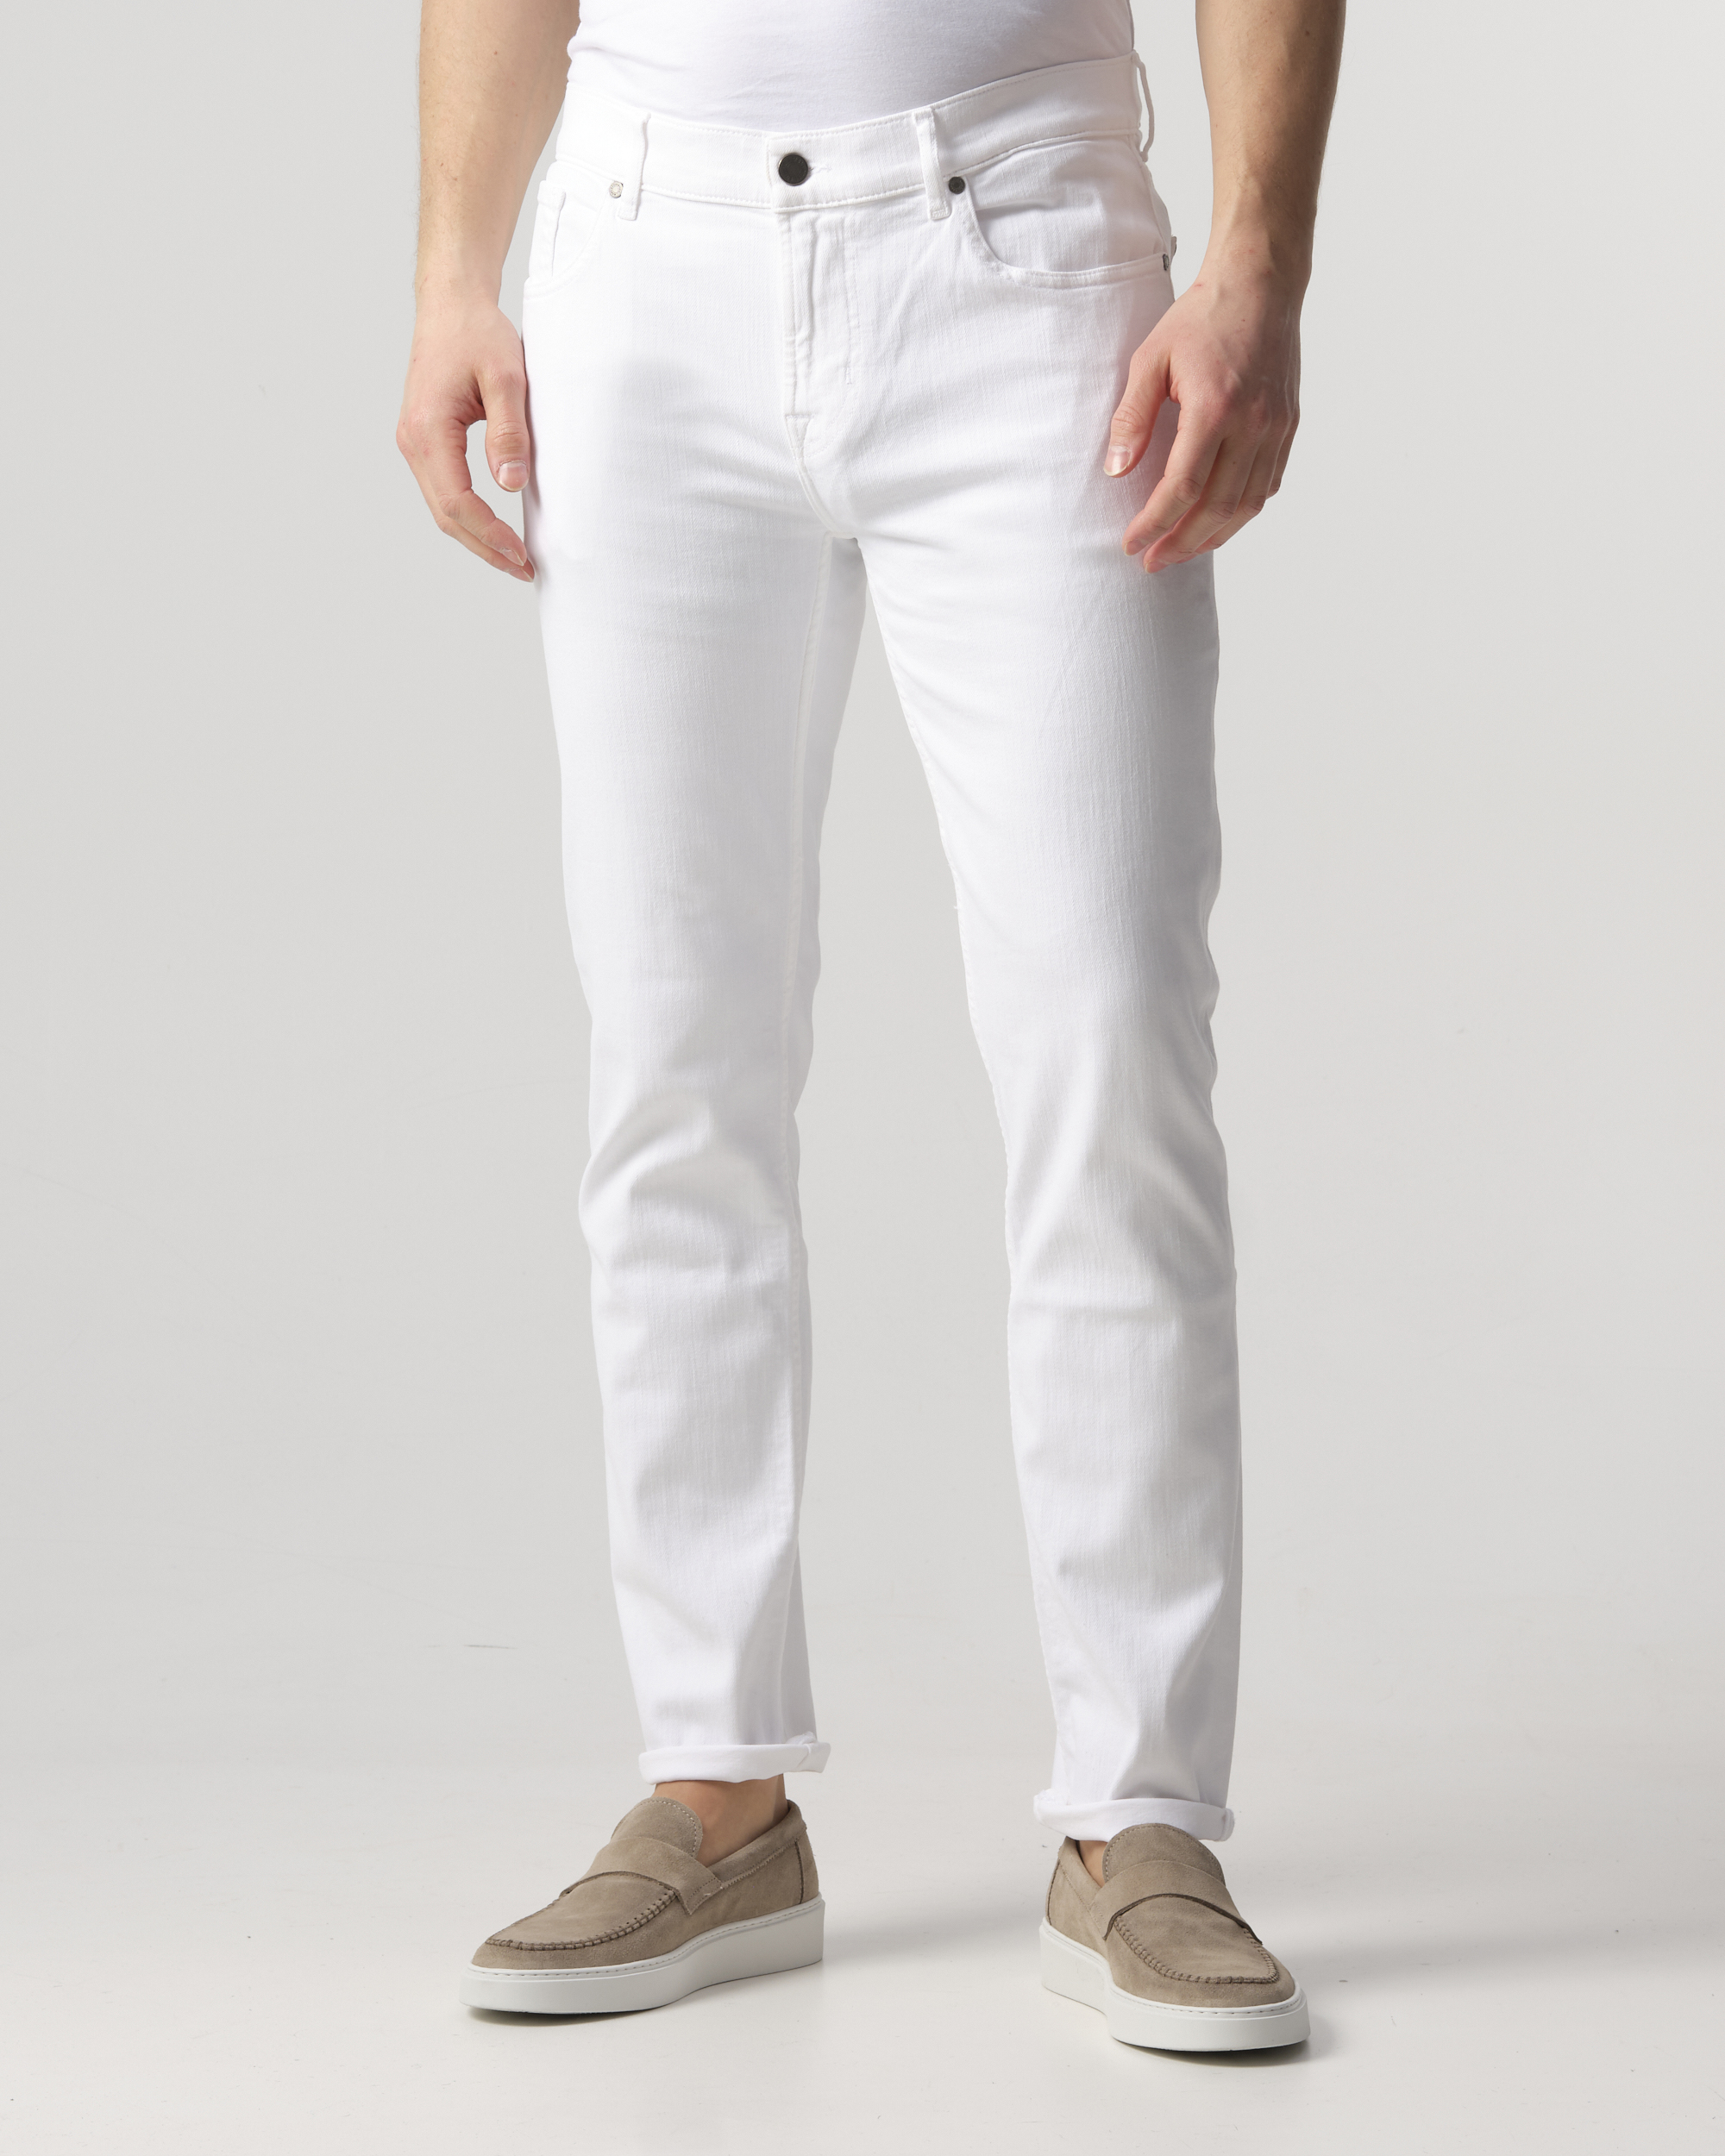 Afbeelding van 7 For All Mankind Slimmy tapered jeans